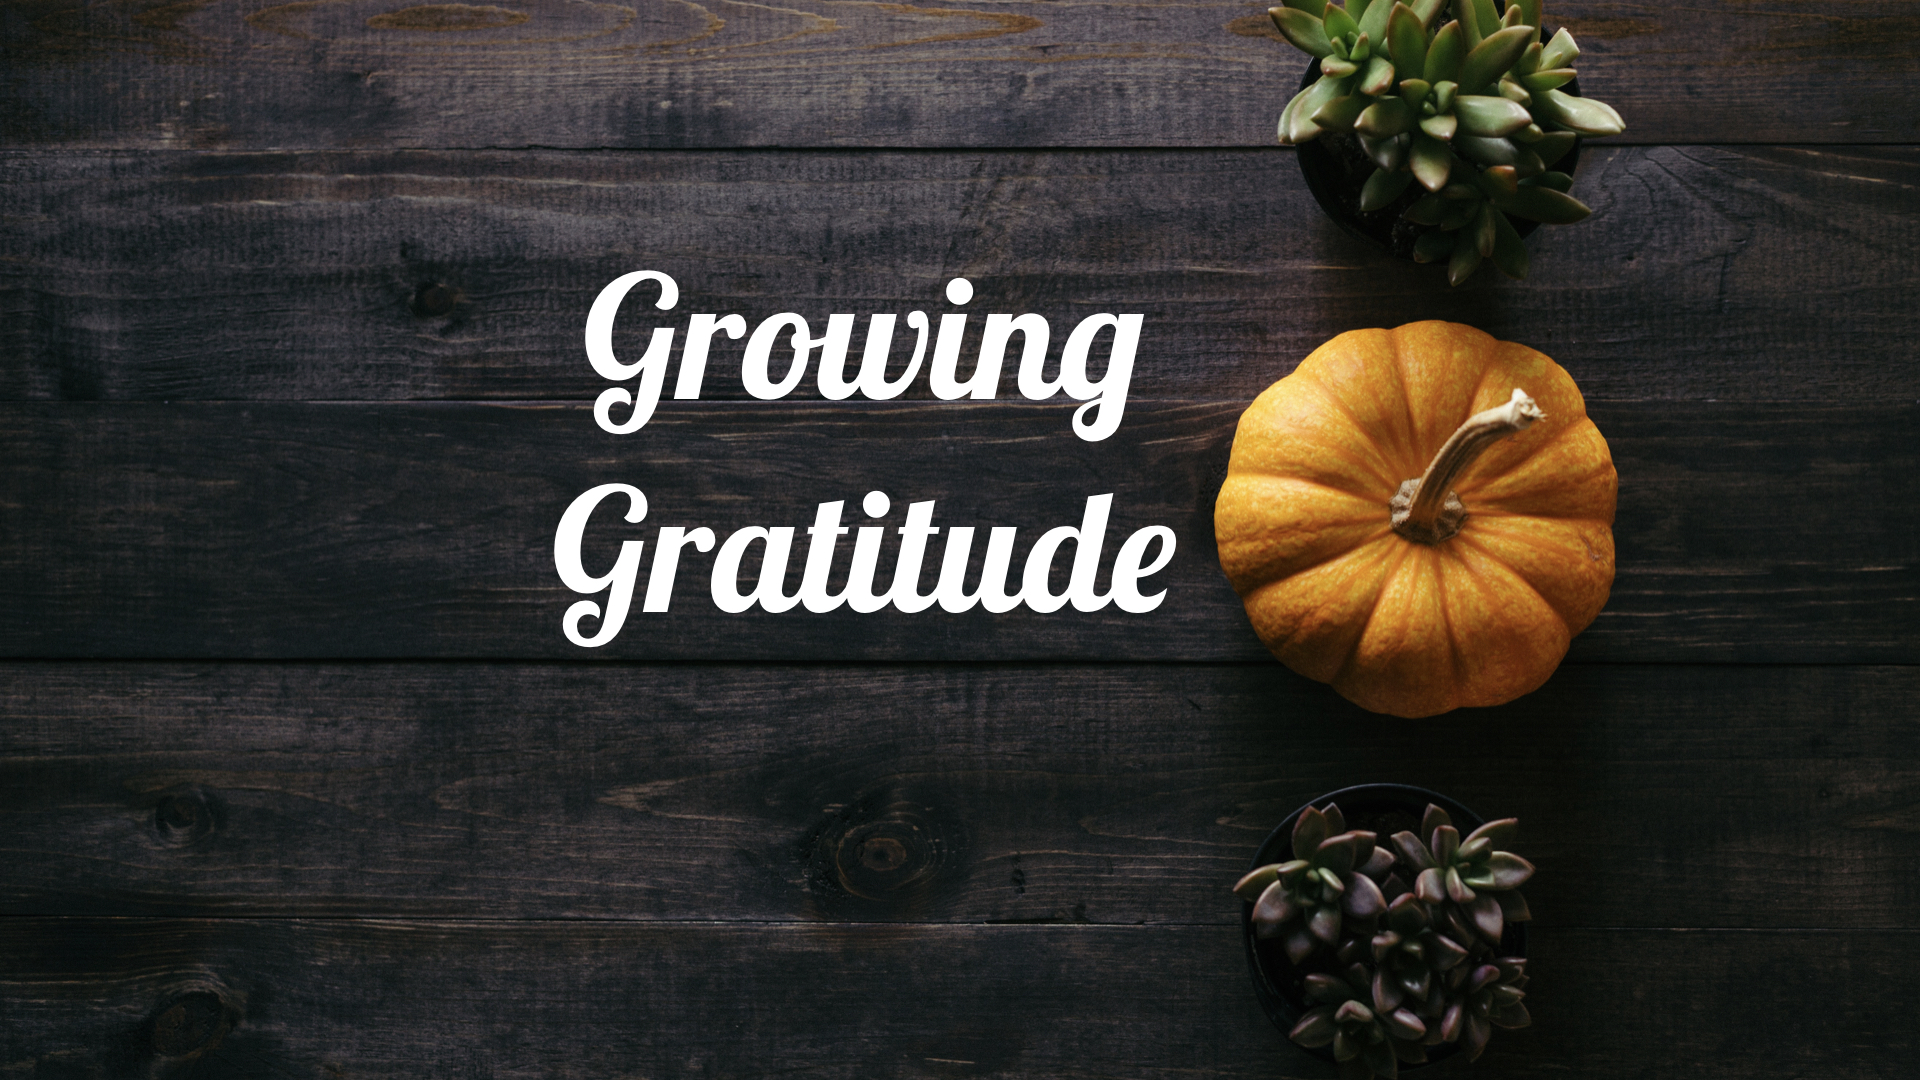 Growing Gratitude | living gratefully with my possessions